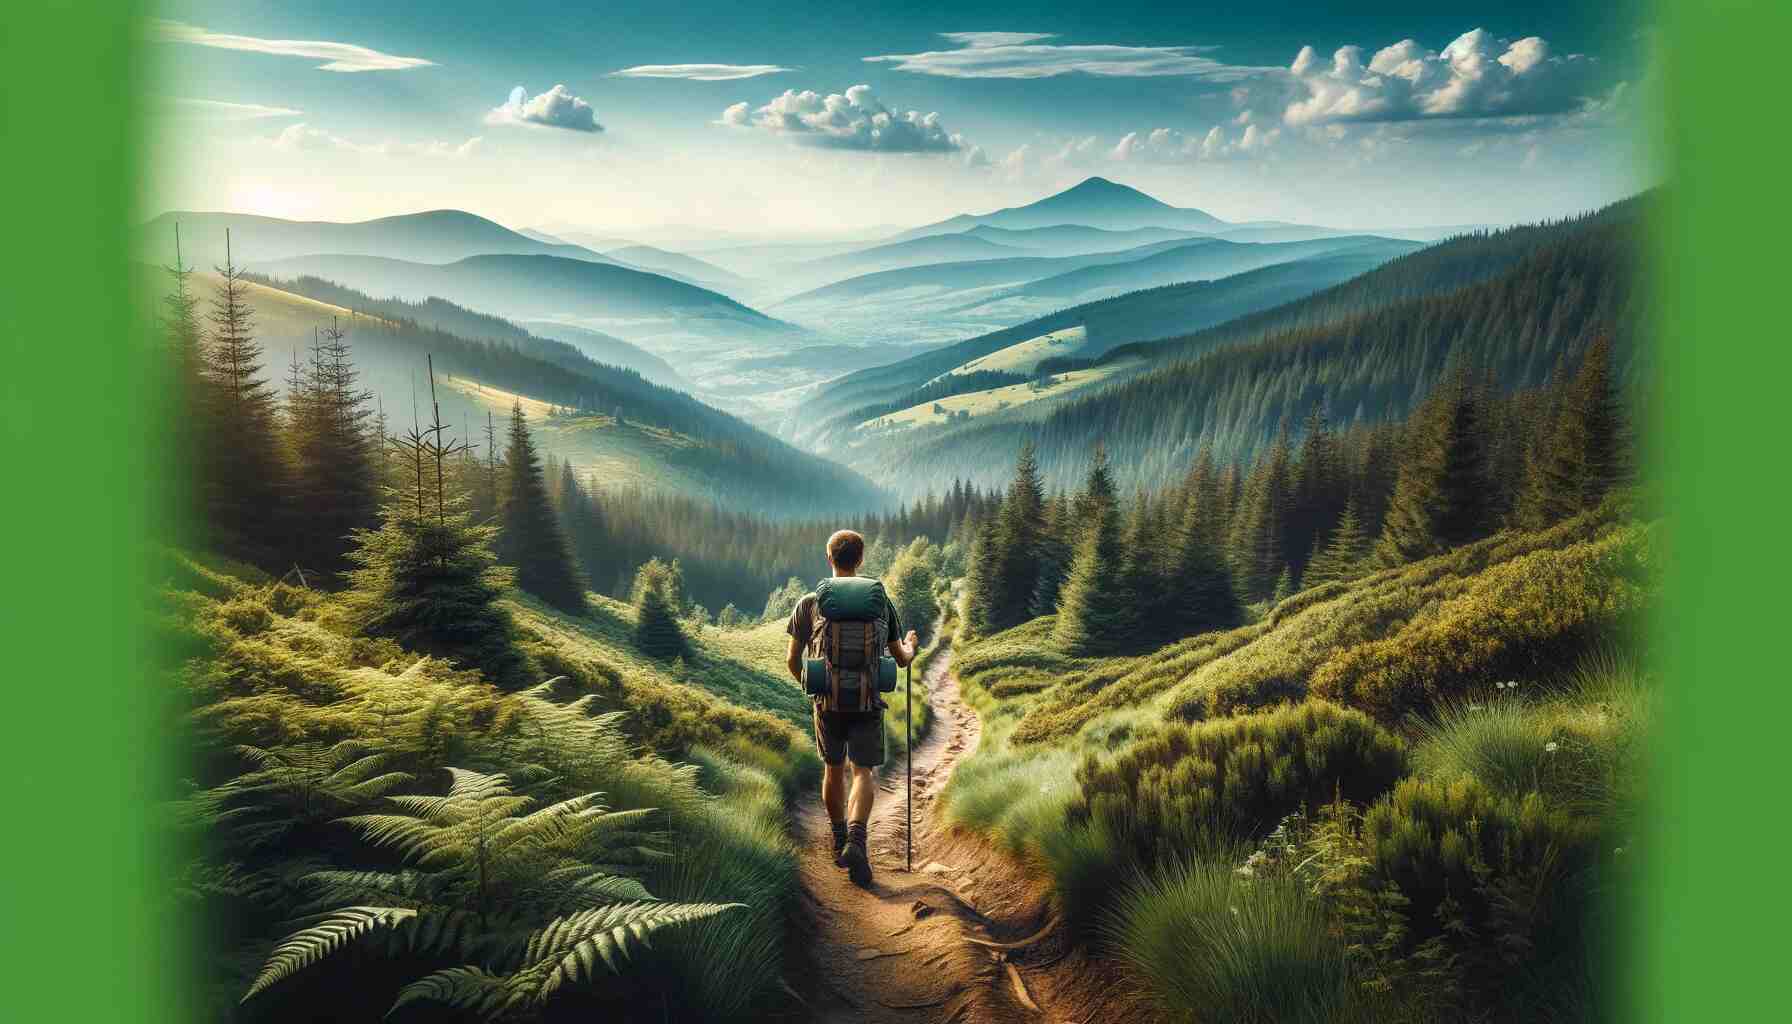 Lone hiker trekking along a scenic trail, surrounded by lush green forests, rolling hills, and a distant mountain range under a clear blue sky, symbolizing peace, adventure, and a connection with nature.